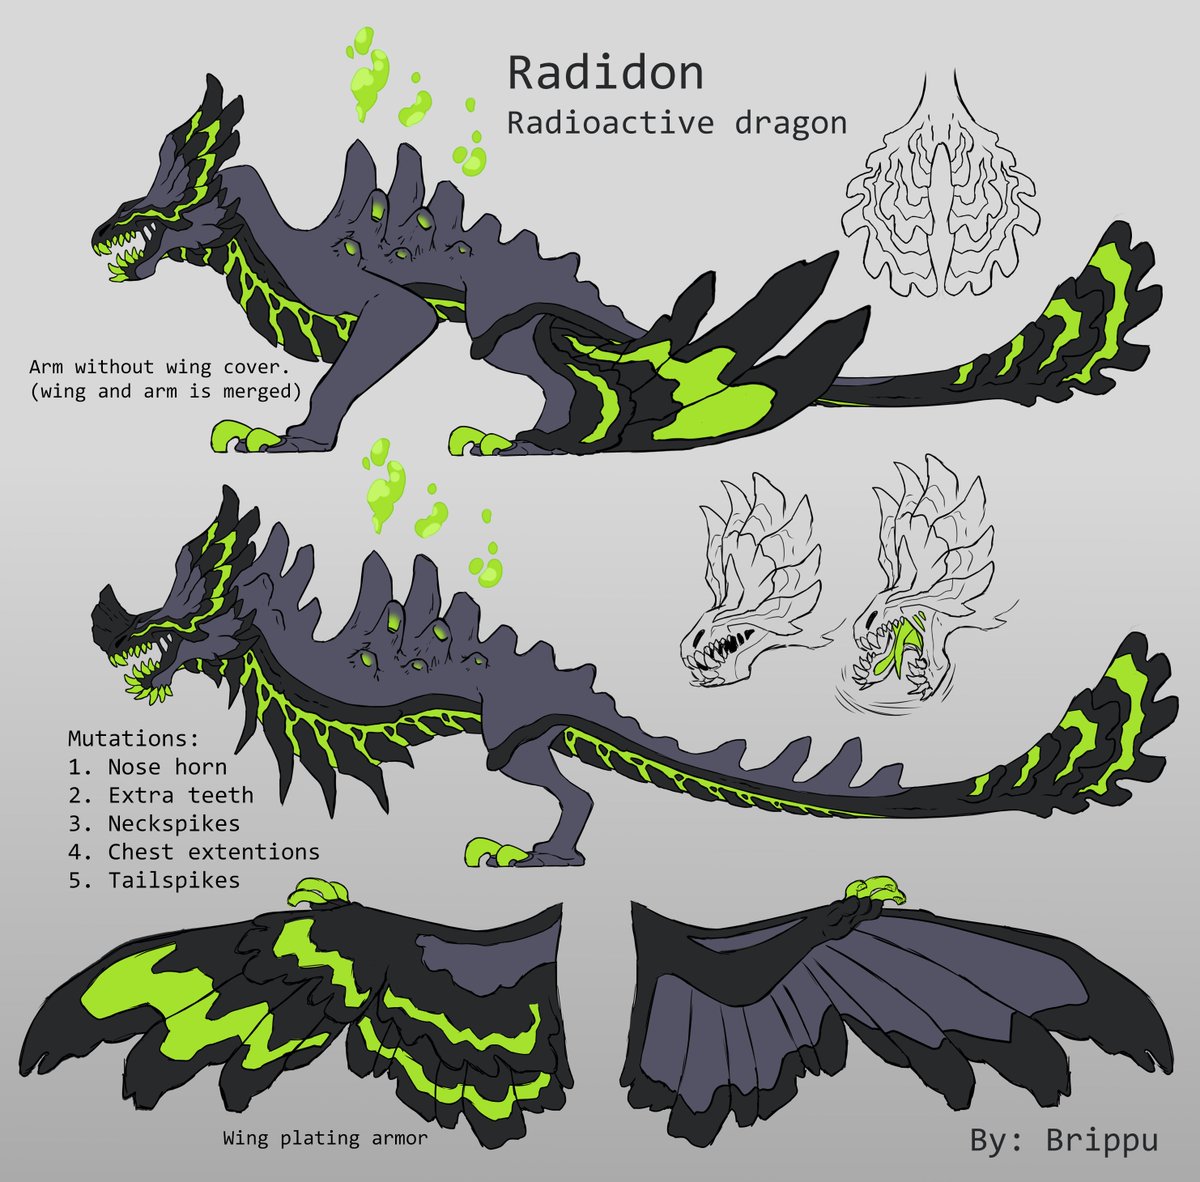 Erythia On Twitter One Word Run A Lovely Dragon We Ve Been Working On For A Huge Upcoming Update Who Doesn T Love A Radiated Toxic Boy Design For This Dragon By Brippu Roblox - roblox dragon adventures mother dragon mutations